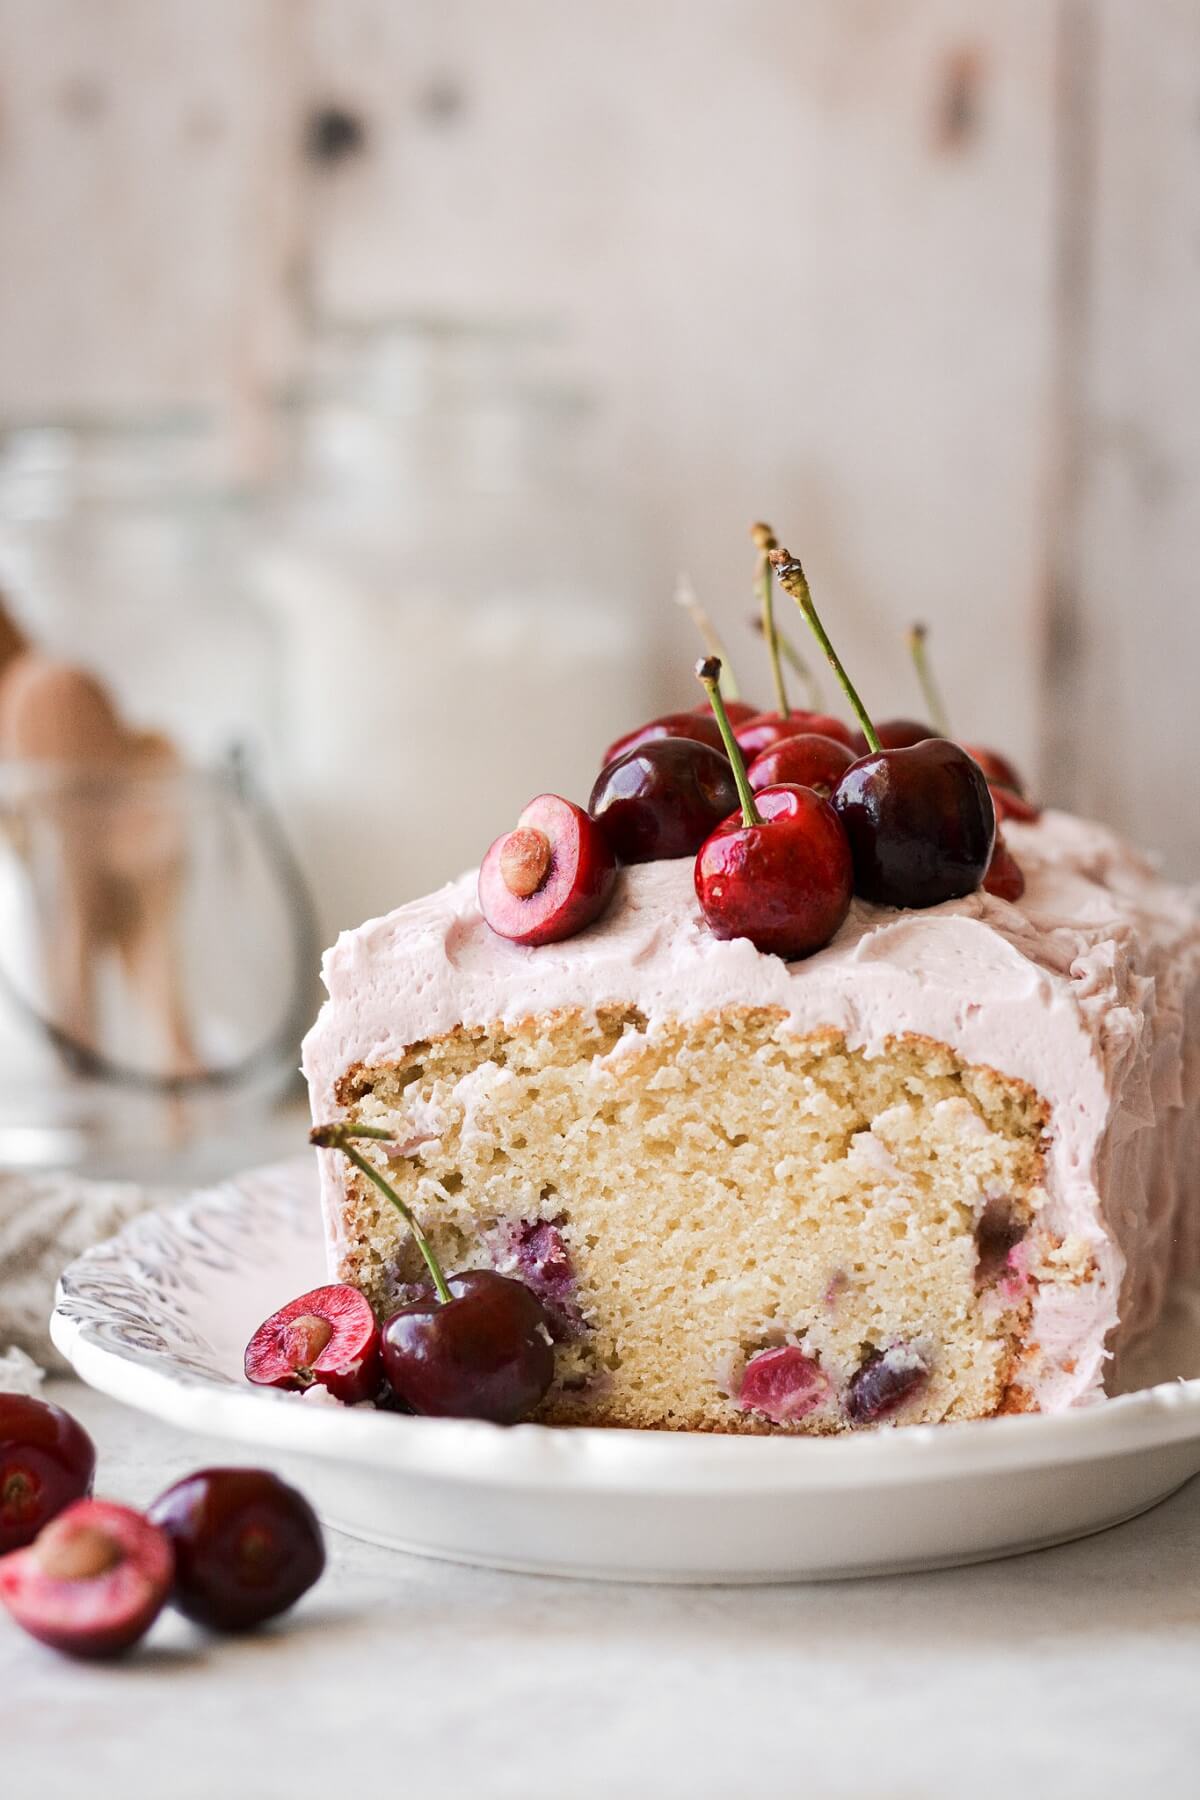 Cherry almond loaf cake with a slice cut.